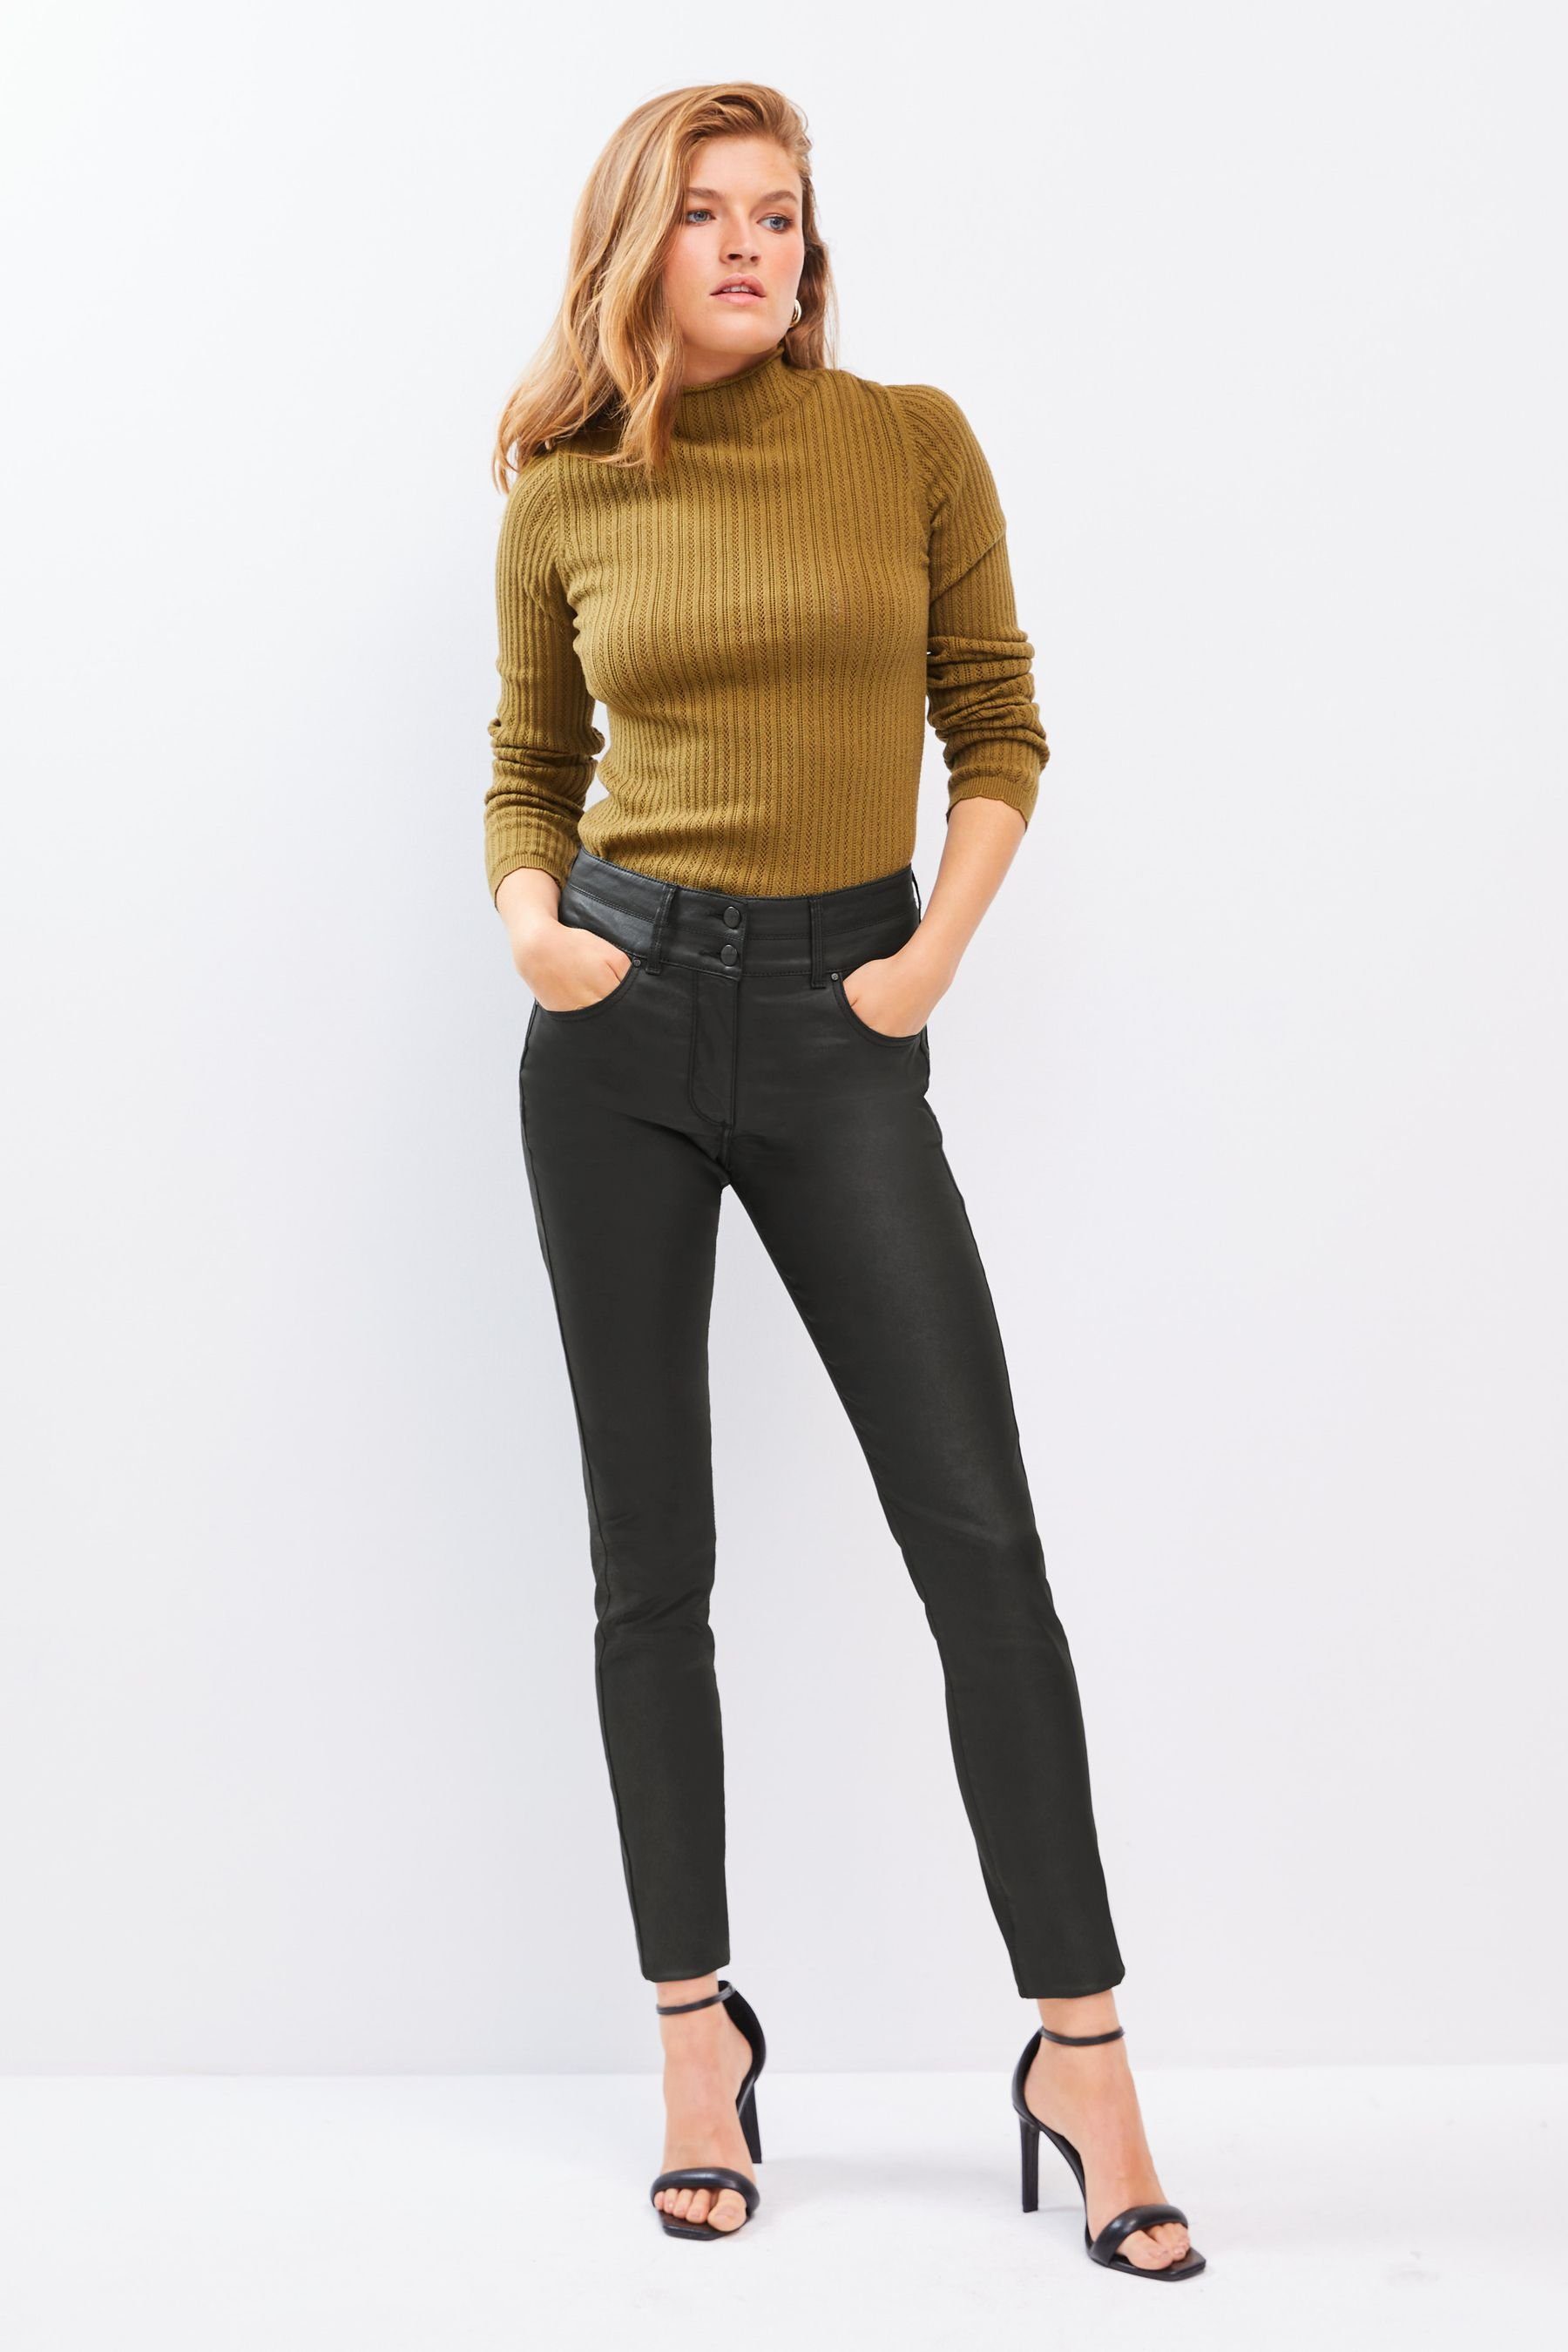 and Skinny-Jeans Style Push-up-Jeans Beschichtete Lift, Next (1-tlg) Shape